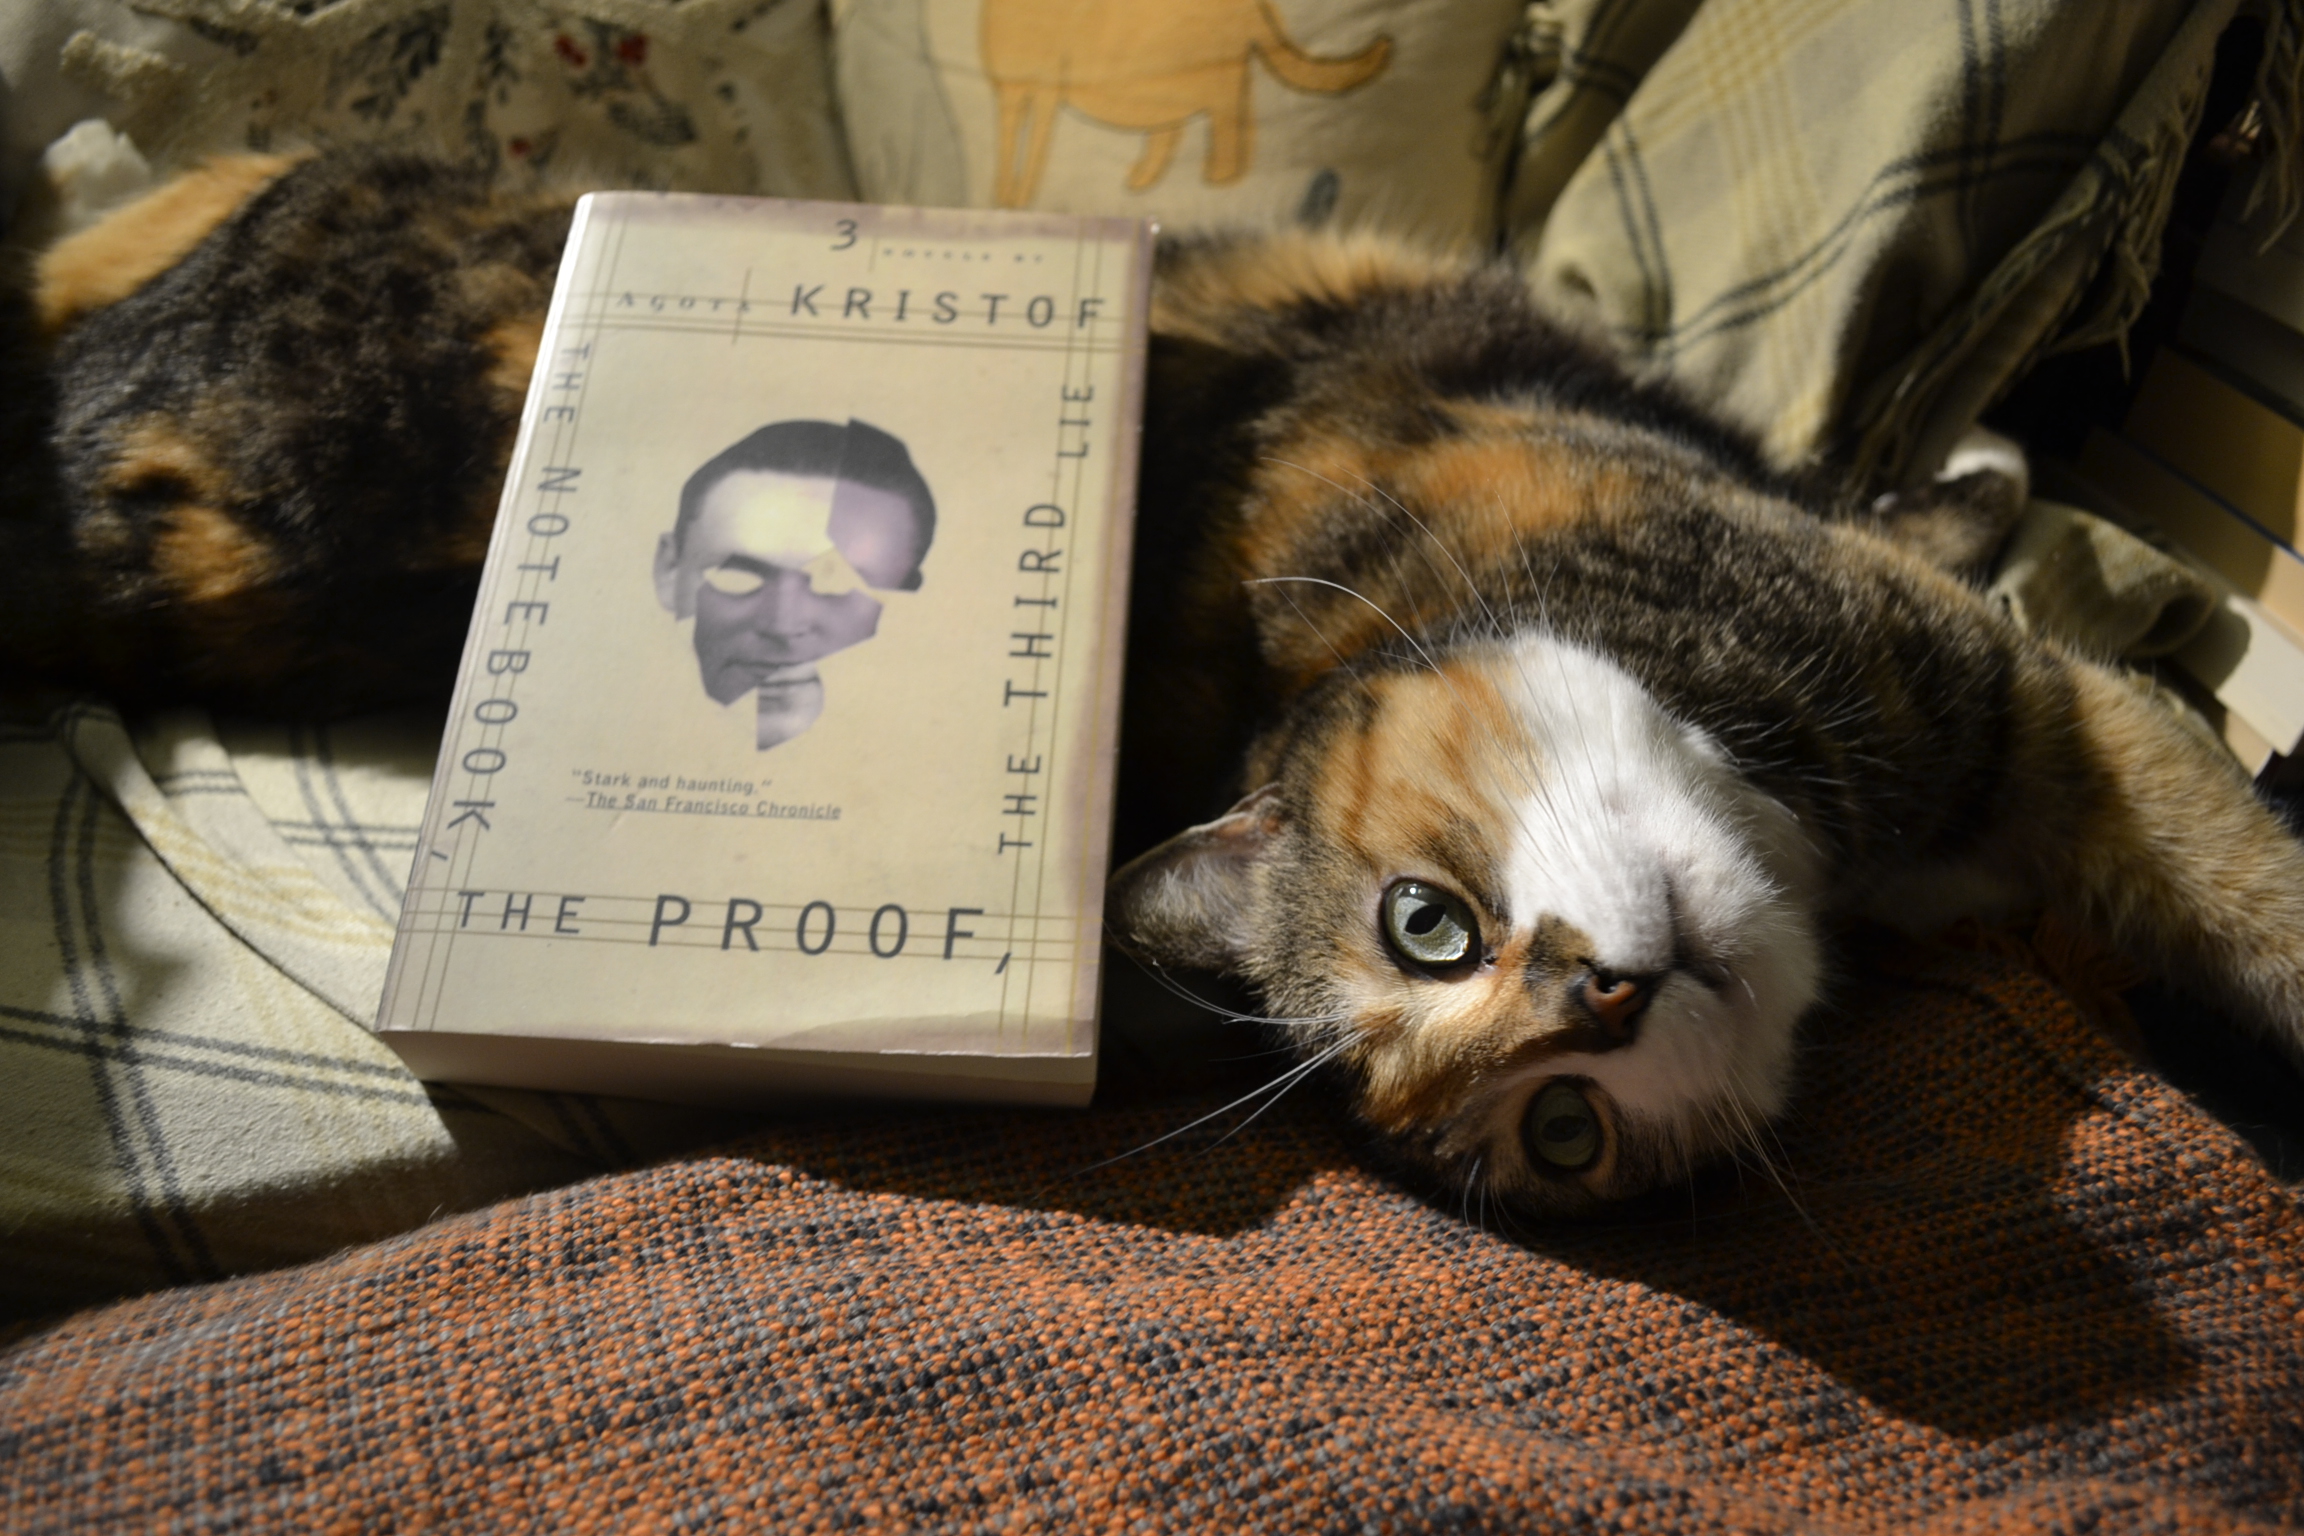 A calico tabby stares into a bright light, her long body and paws stretching out. A book rests against her side.